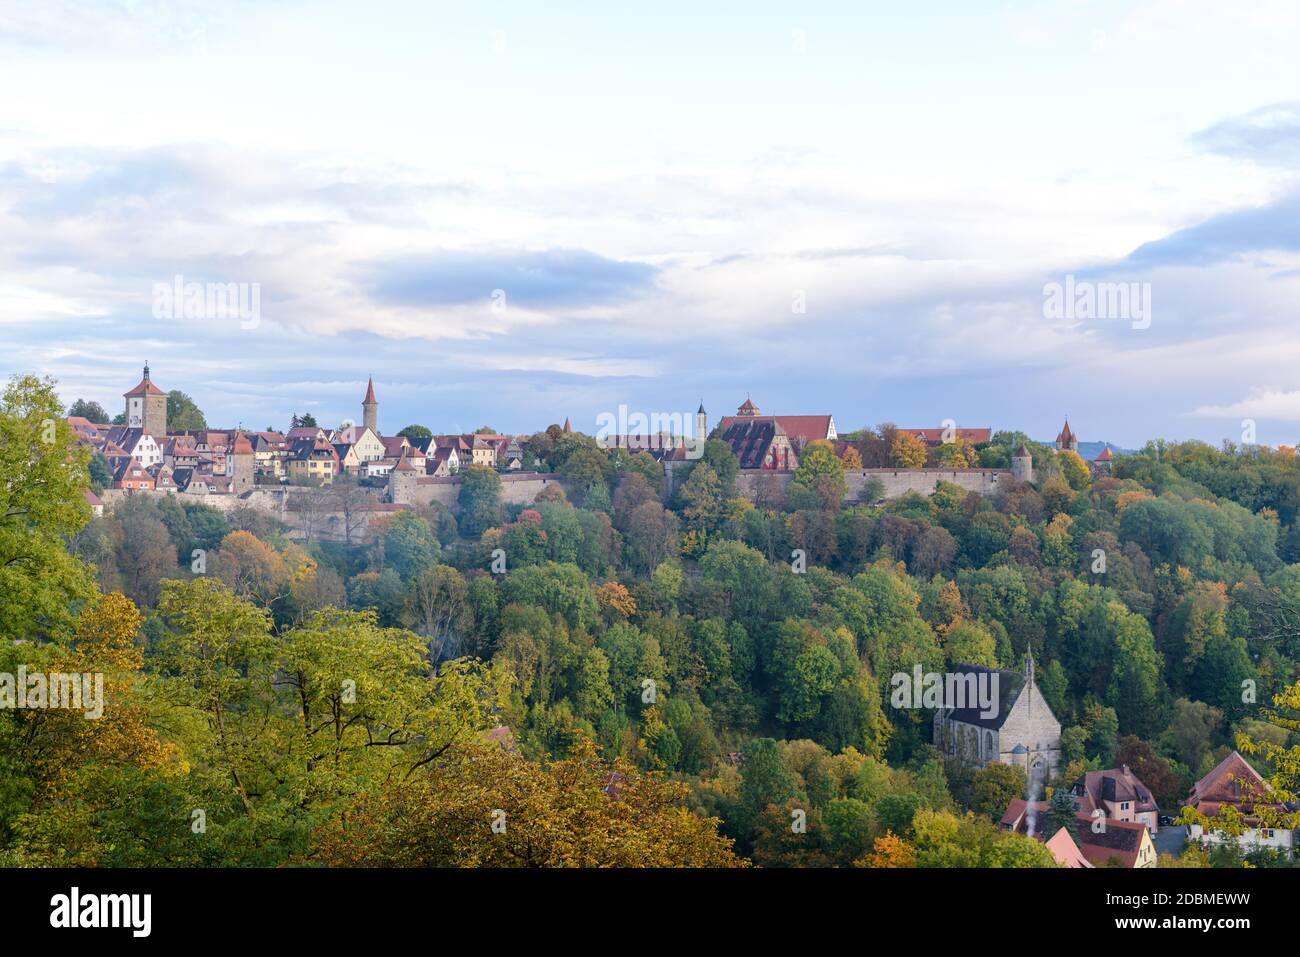 Rothenburg ob der Tauber in autumn with colorful trees. Bavaria, Bayern, Germany Stock Photo